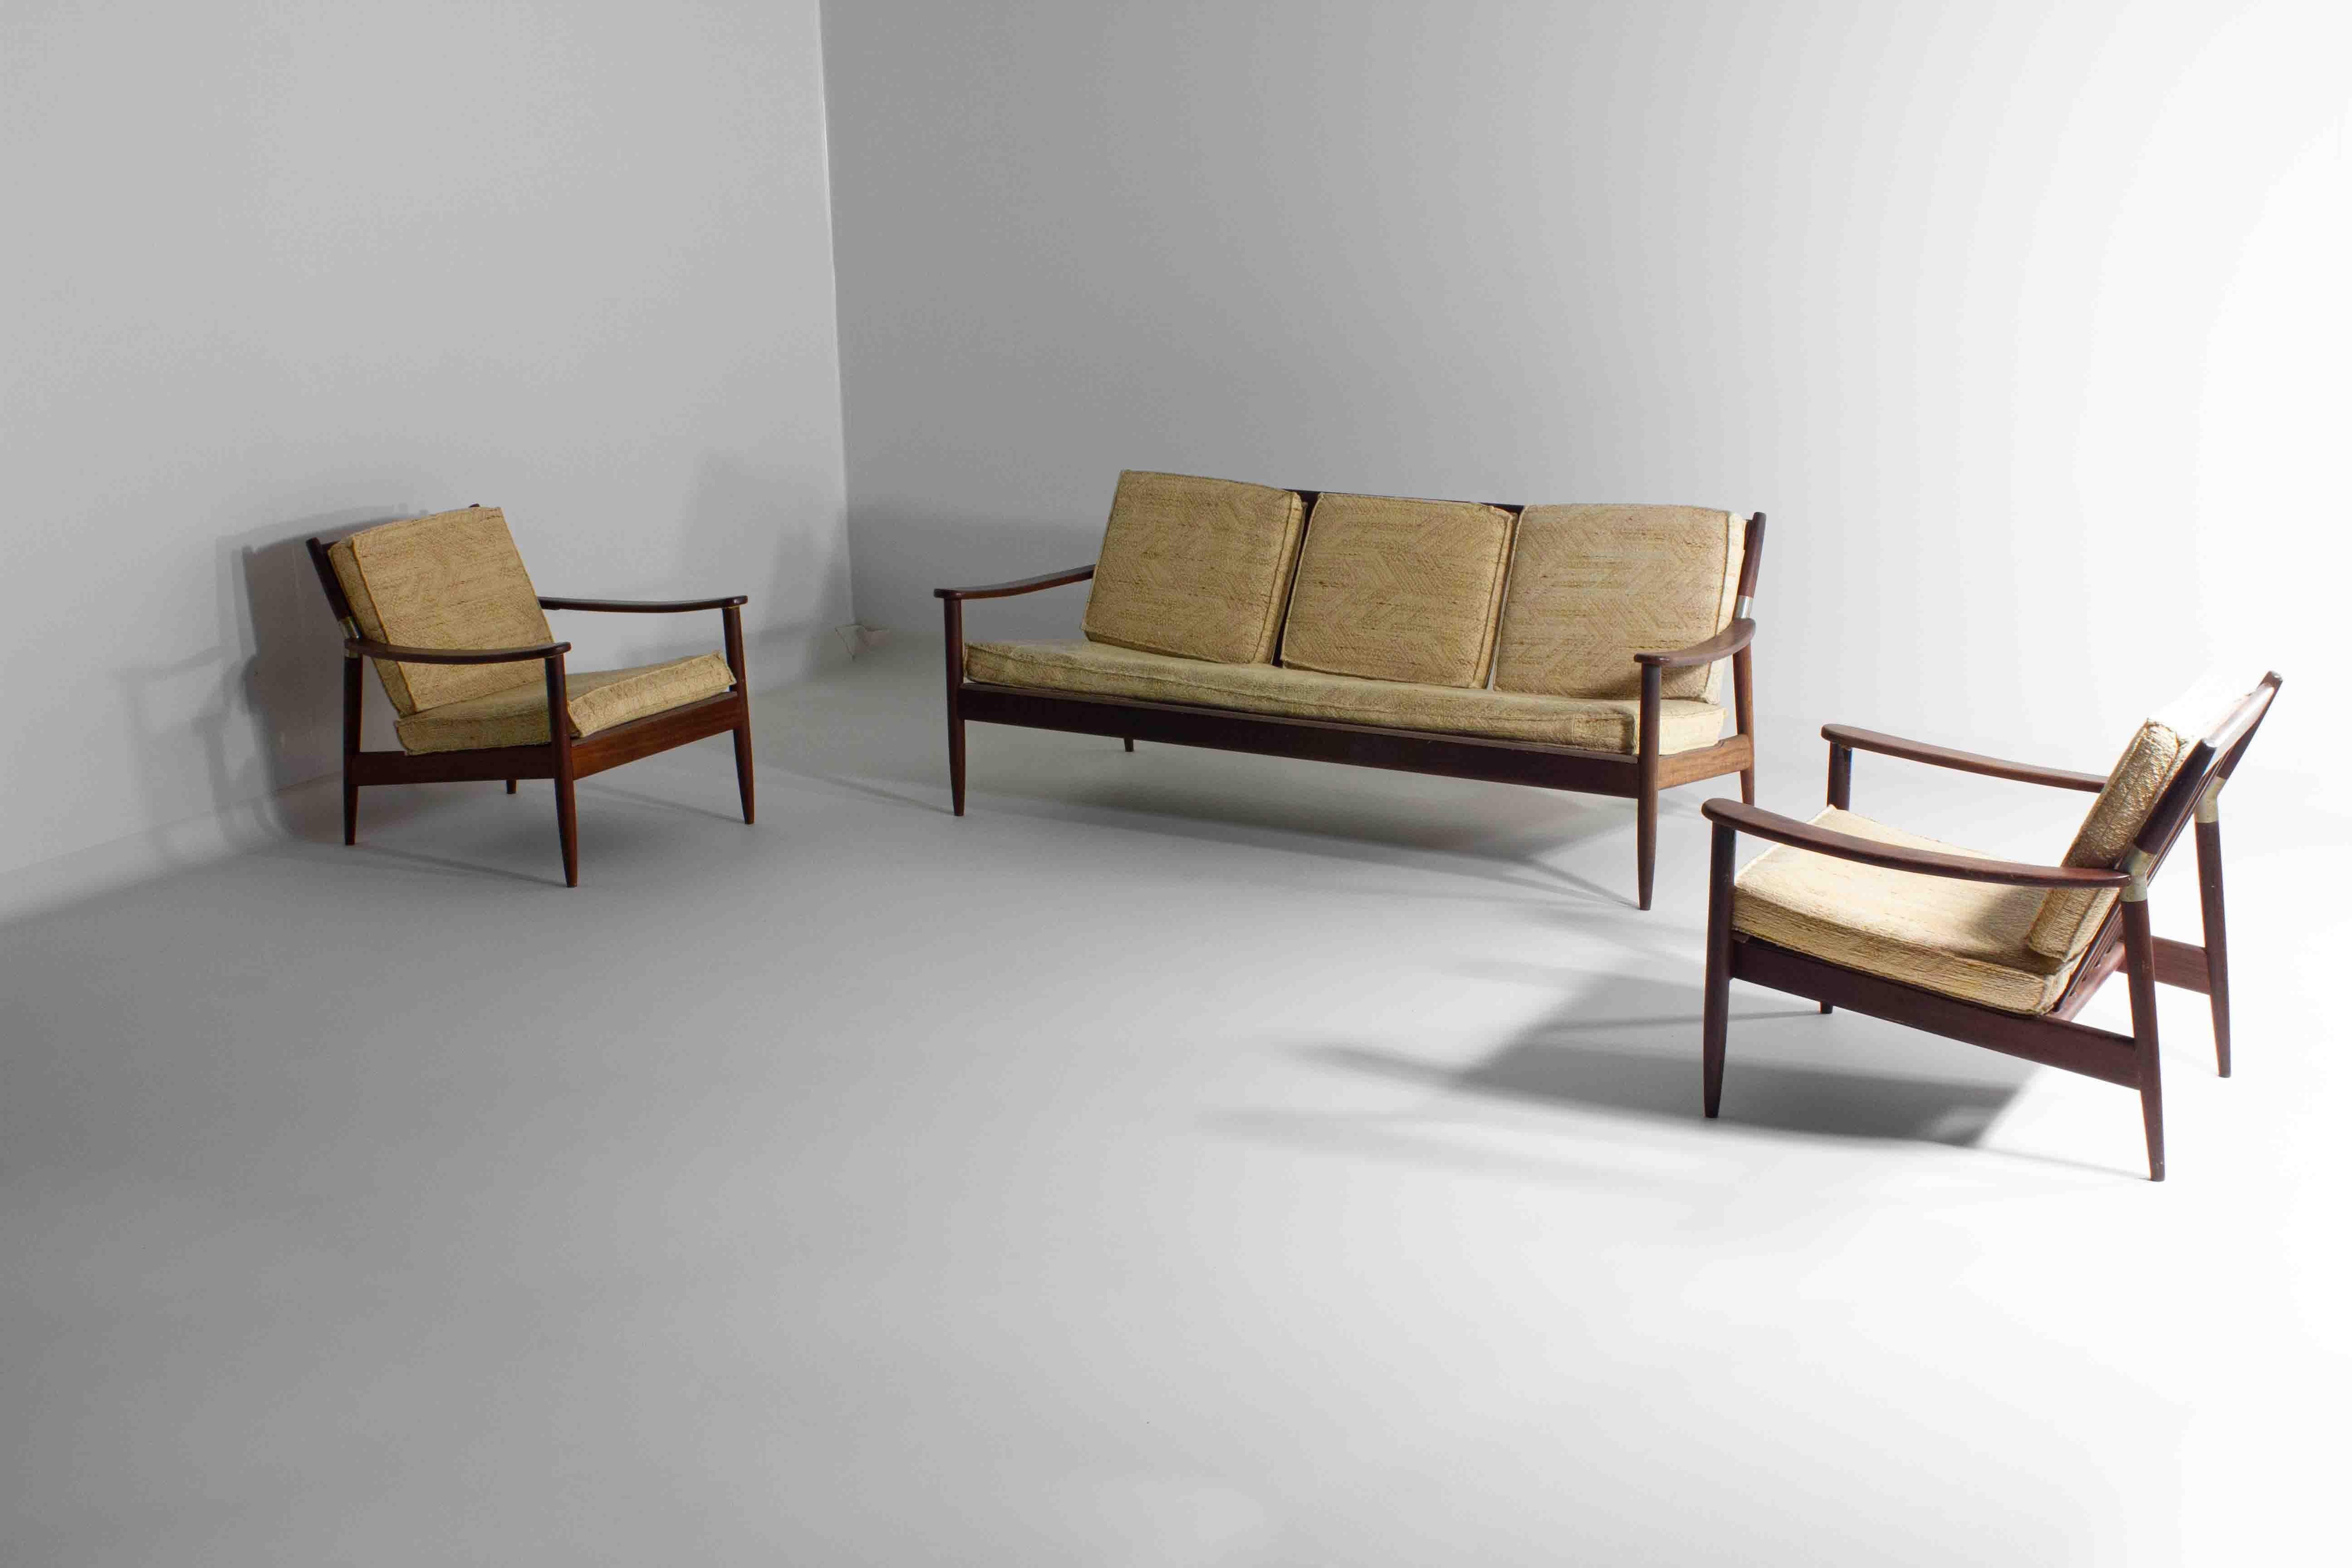 This set of mid-century Scandinavian lounge chairs is a paragon of the design principles that have made this style an enduring influence in interior design. It features a streamlined, low-profile teak frames that showcase a rich, warm patina and a